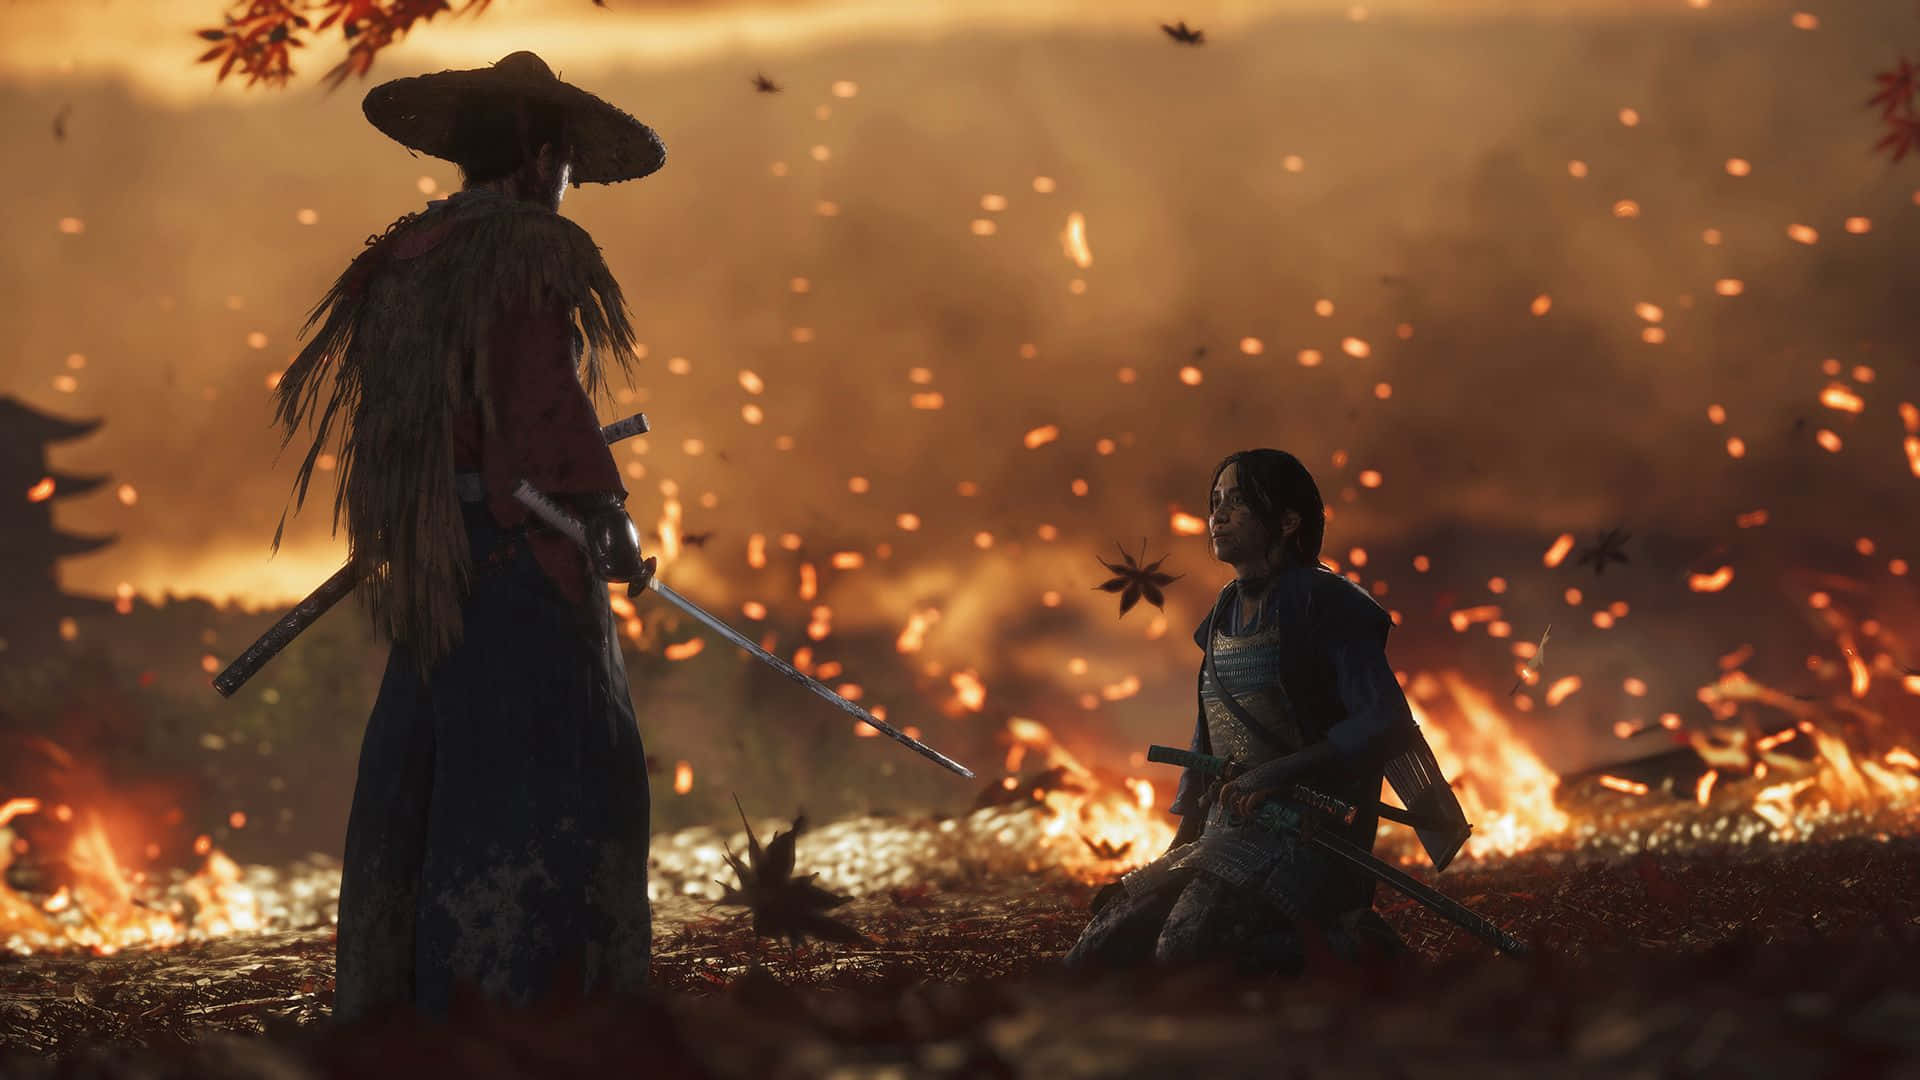 Explore the Land of the Samurai in the critically acclaimed game, Ghost of Tsushima.